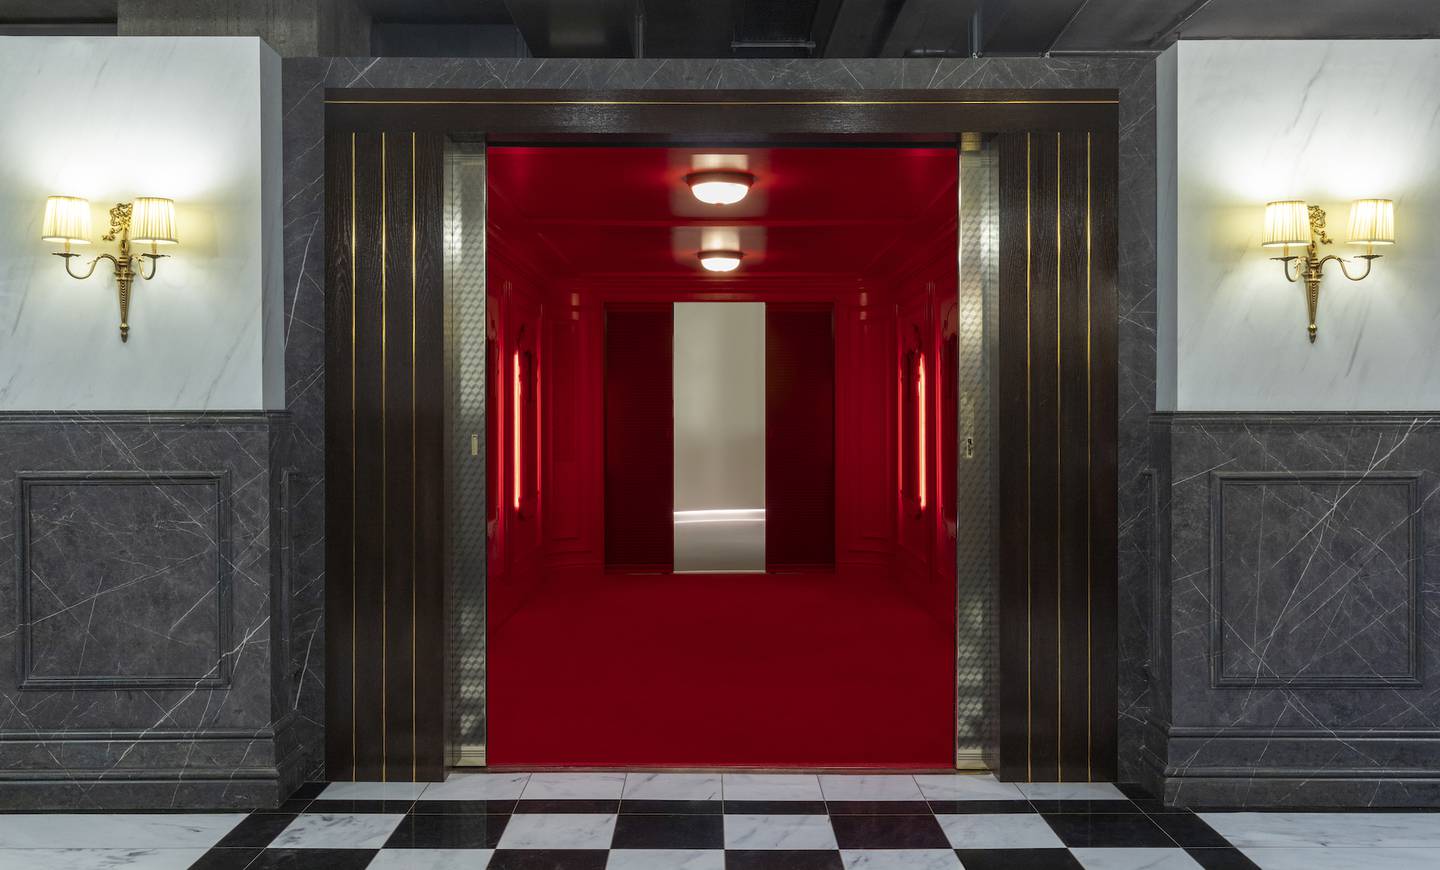 The “red ascending room” is a recreation of the first electric elevator at the Savoy Hotel, where Gucci founder Guccio Gucci worked as a teenager.